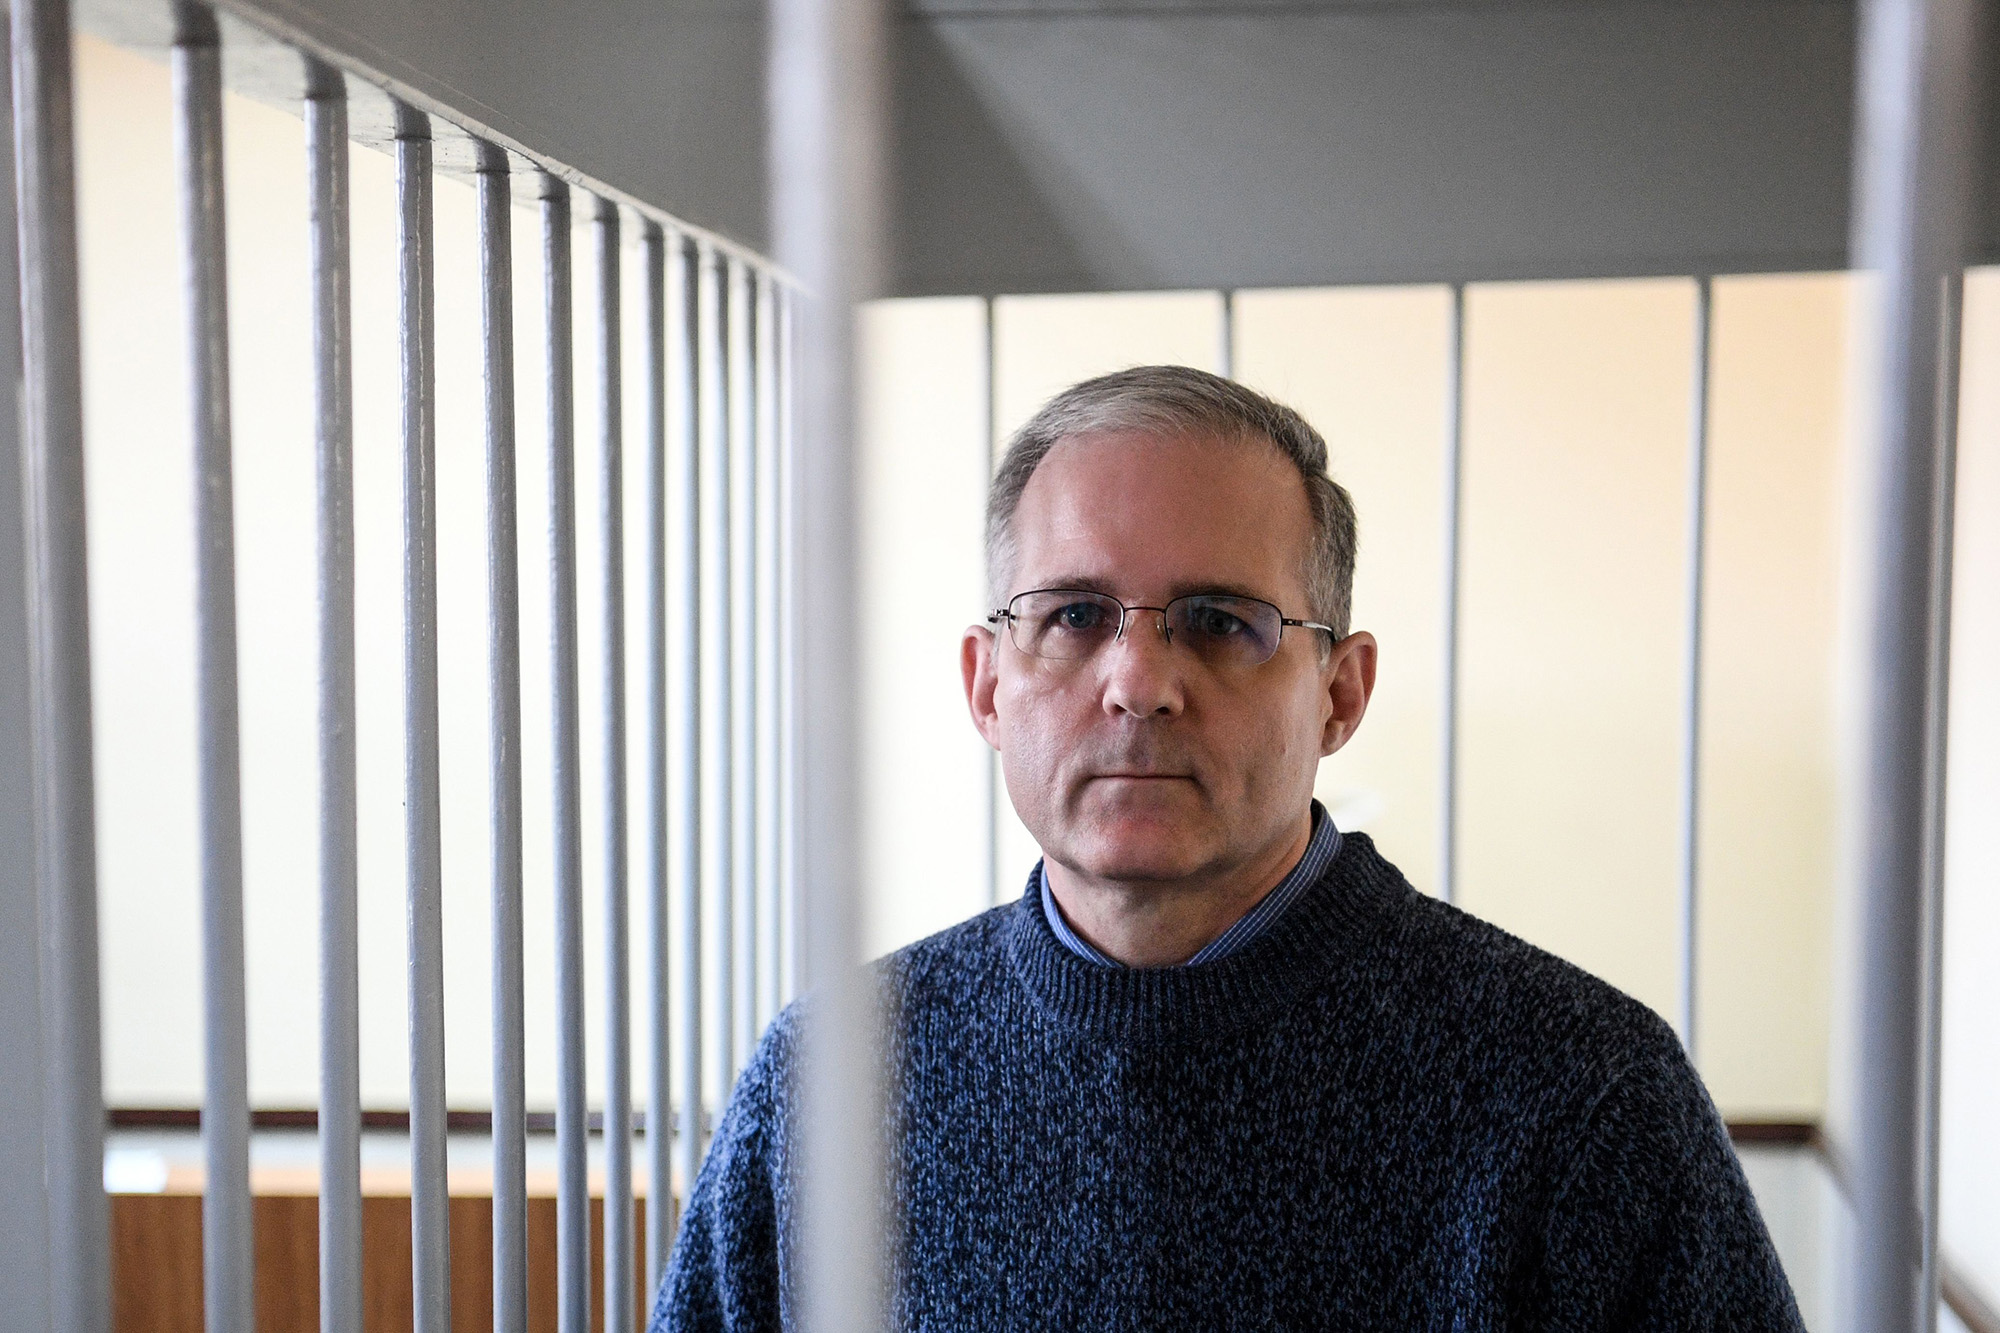 Paul Whelan stands inside a defendants' cage during a hearing at a court in Moscow, Russia, on August 23, 2019. 